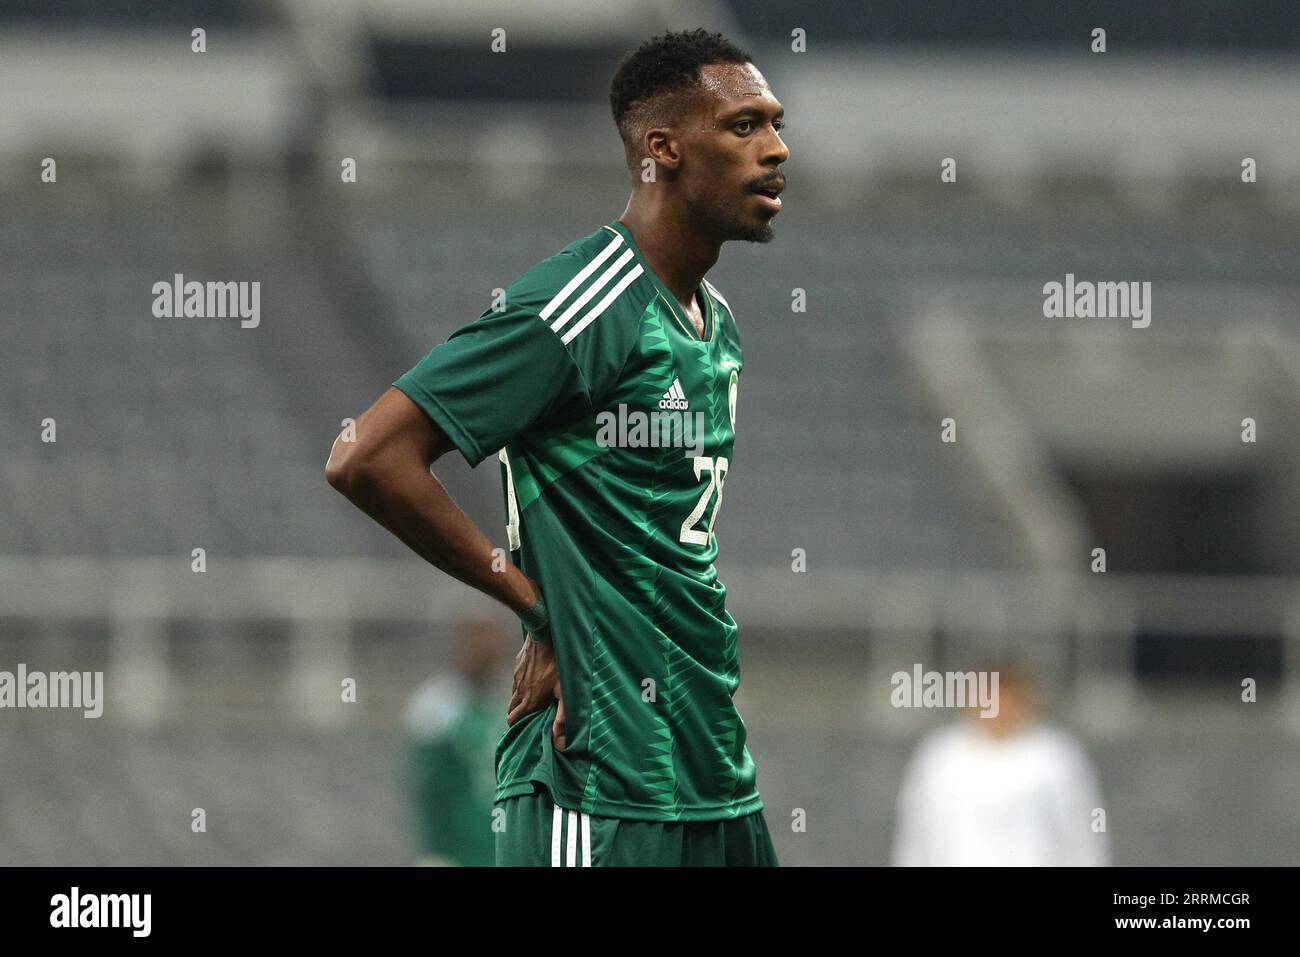 Mohamed Kanno of Saudi Arabia during the International Friendly match between Saudi Arabia and Costa Rica at St. James's Park, Newcastle on Friday 8th September 2023. (Photo: Robert Smith | MI News) Credit: MI News & Sport /Alamy Live News Stock Photo